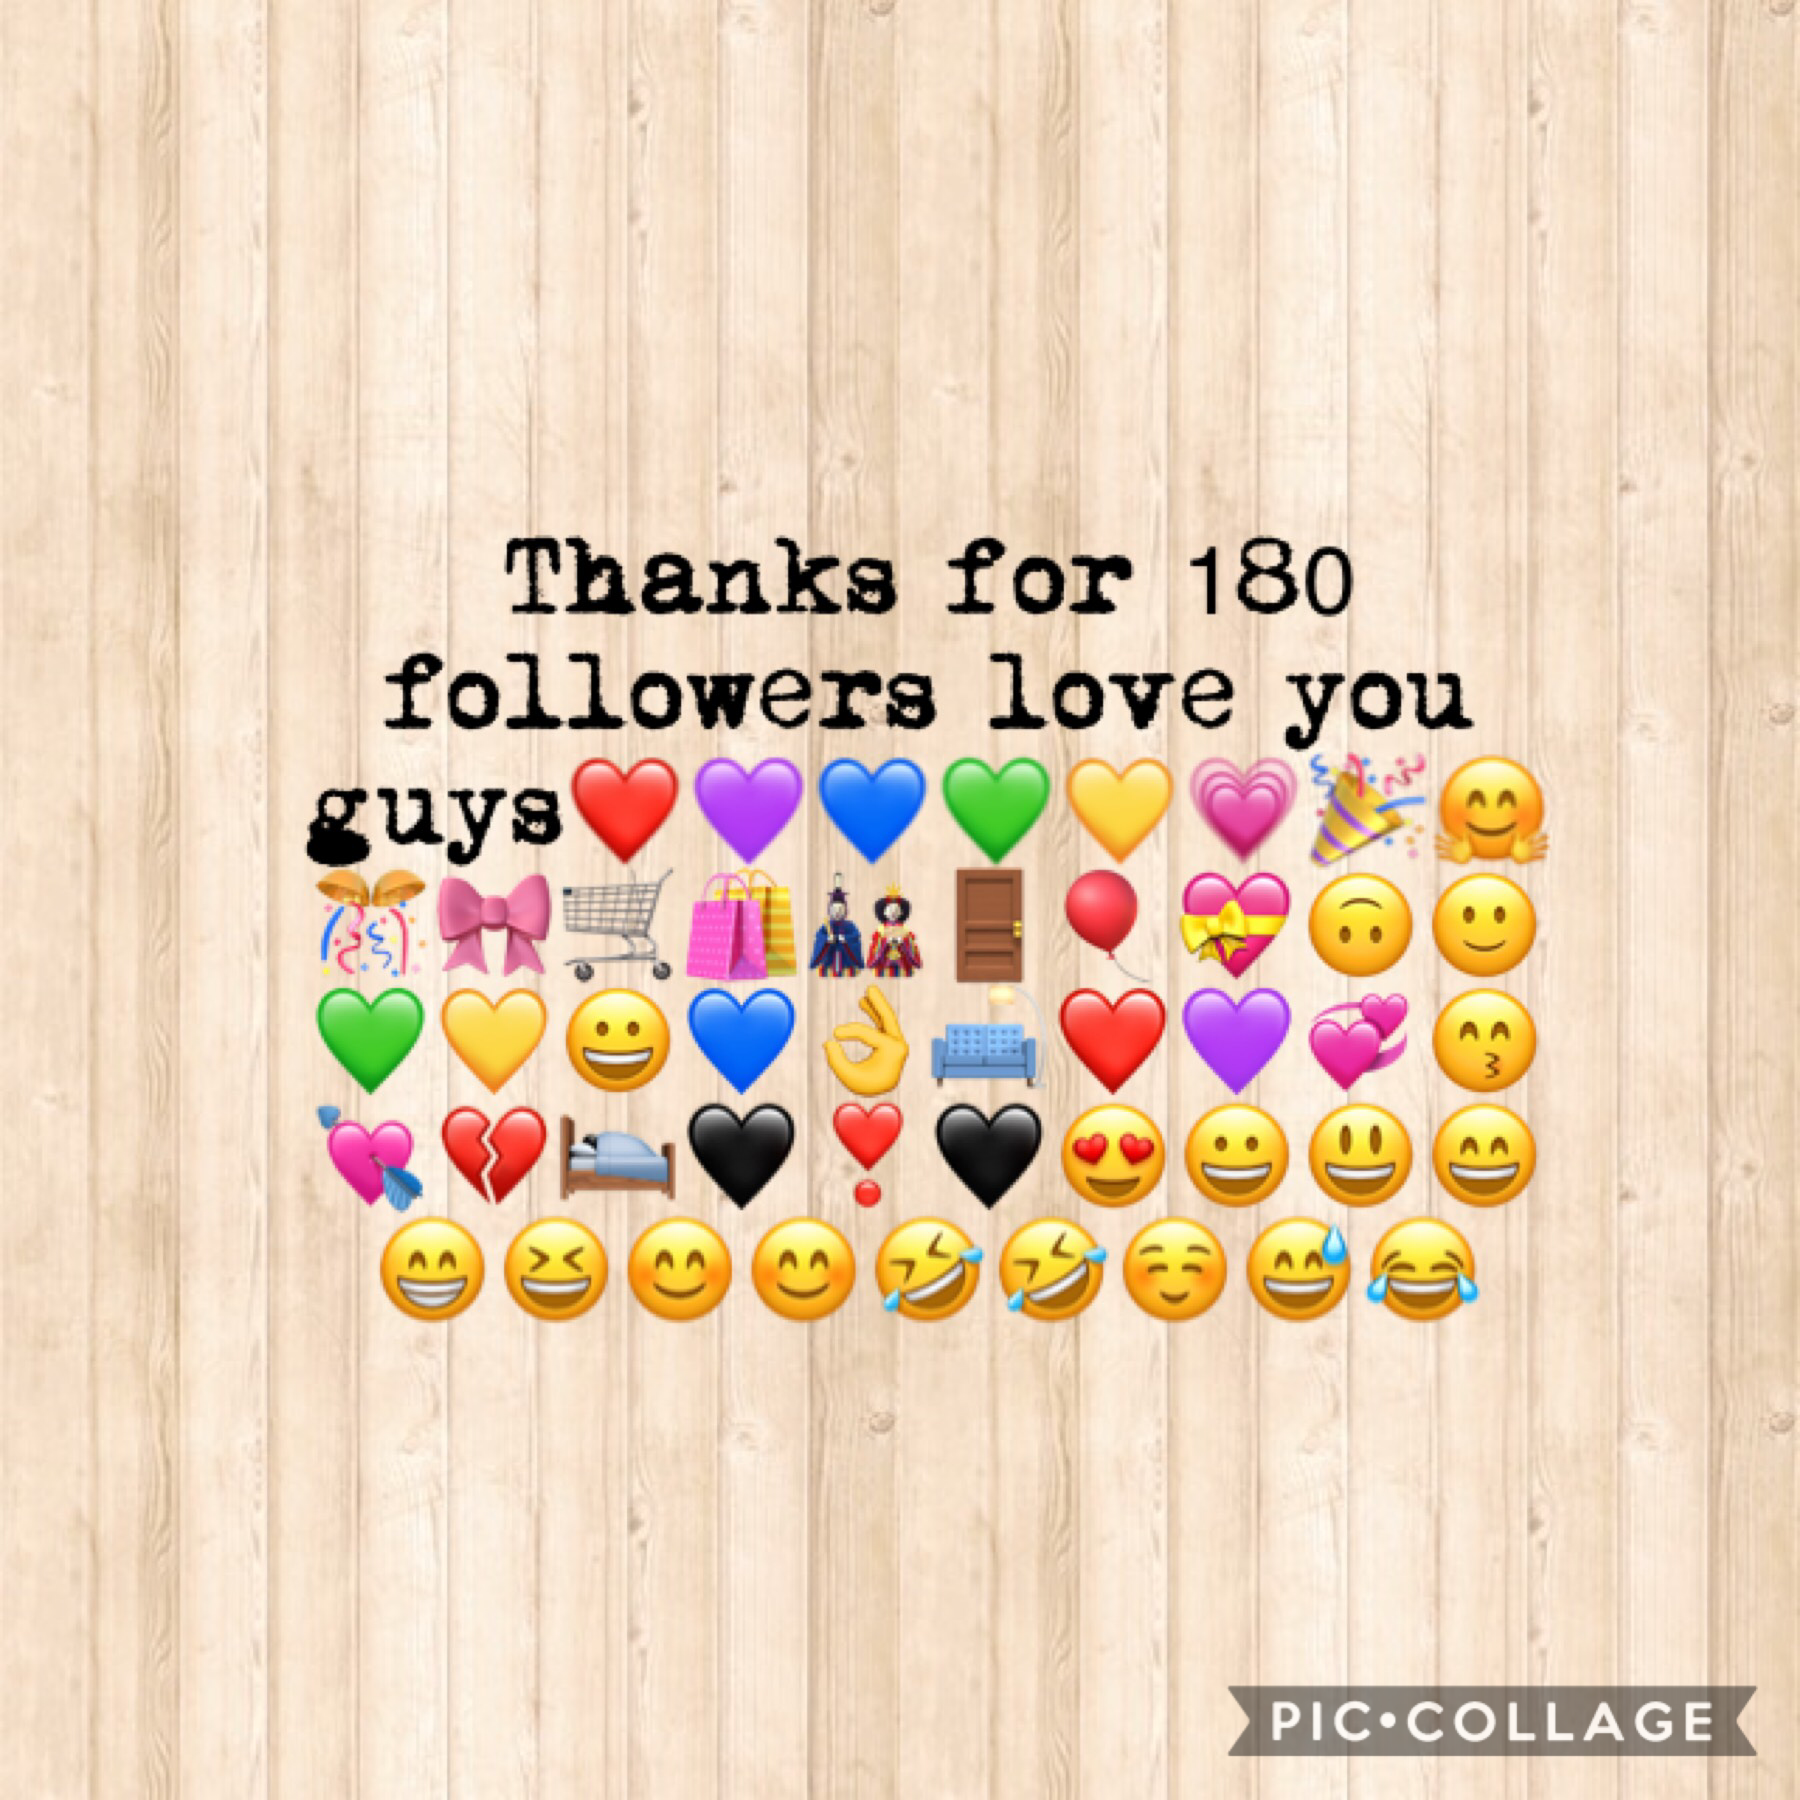 Love y'all 💜❤️💚💙💛❤️💜🖤💖💓💗💘💝💞💕💔❣️